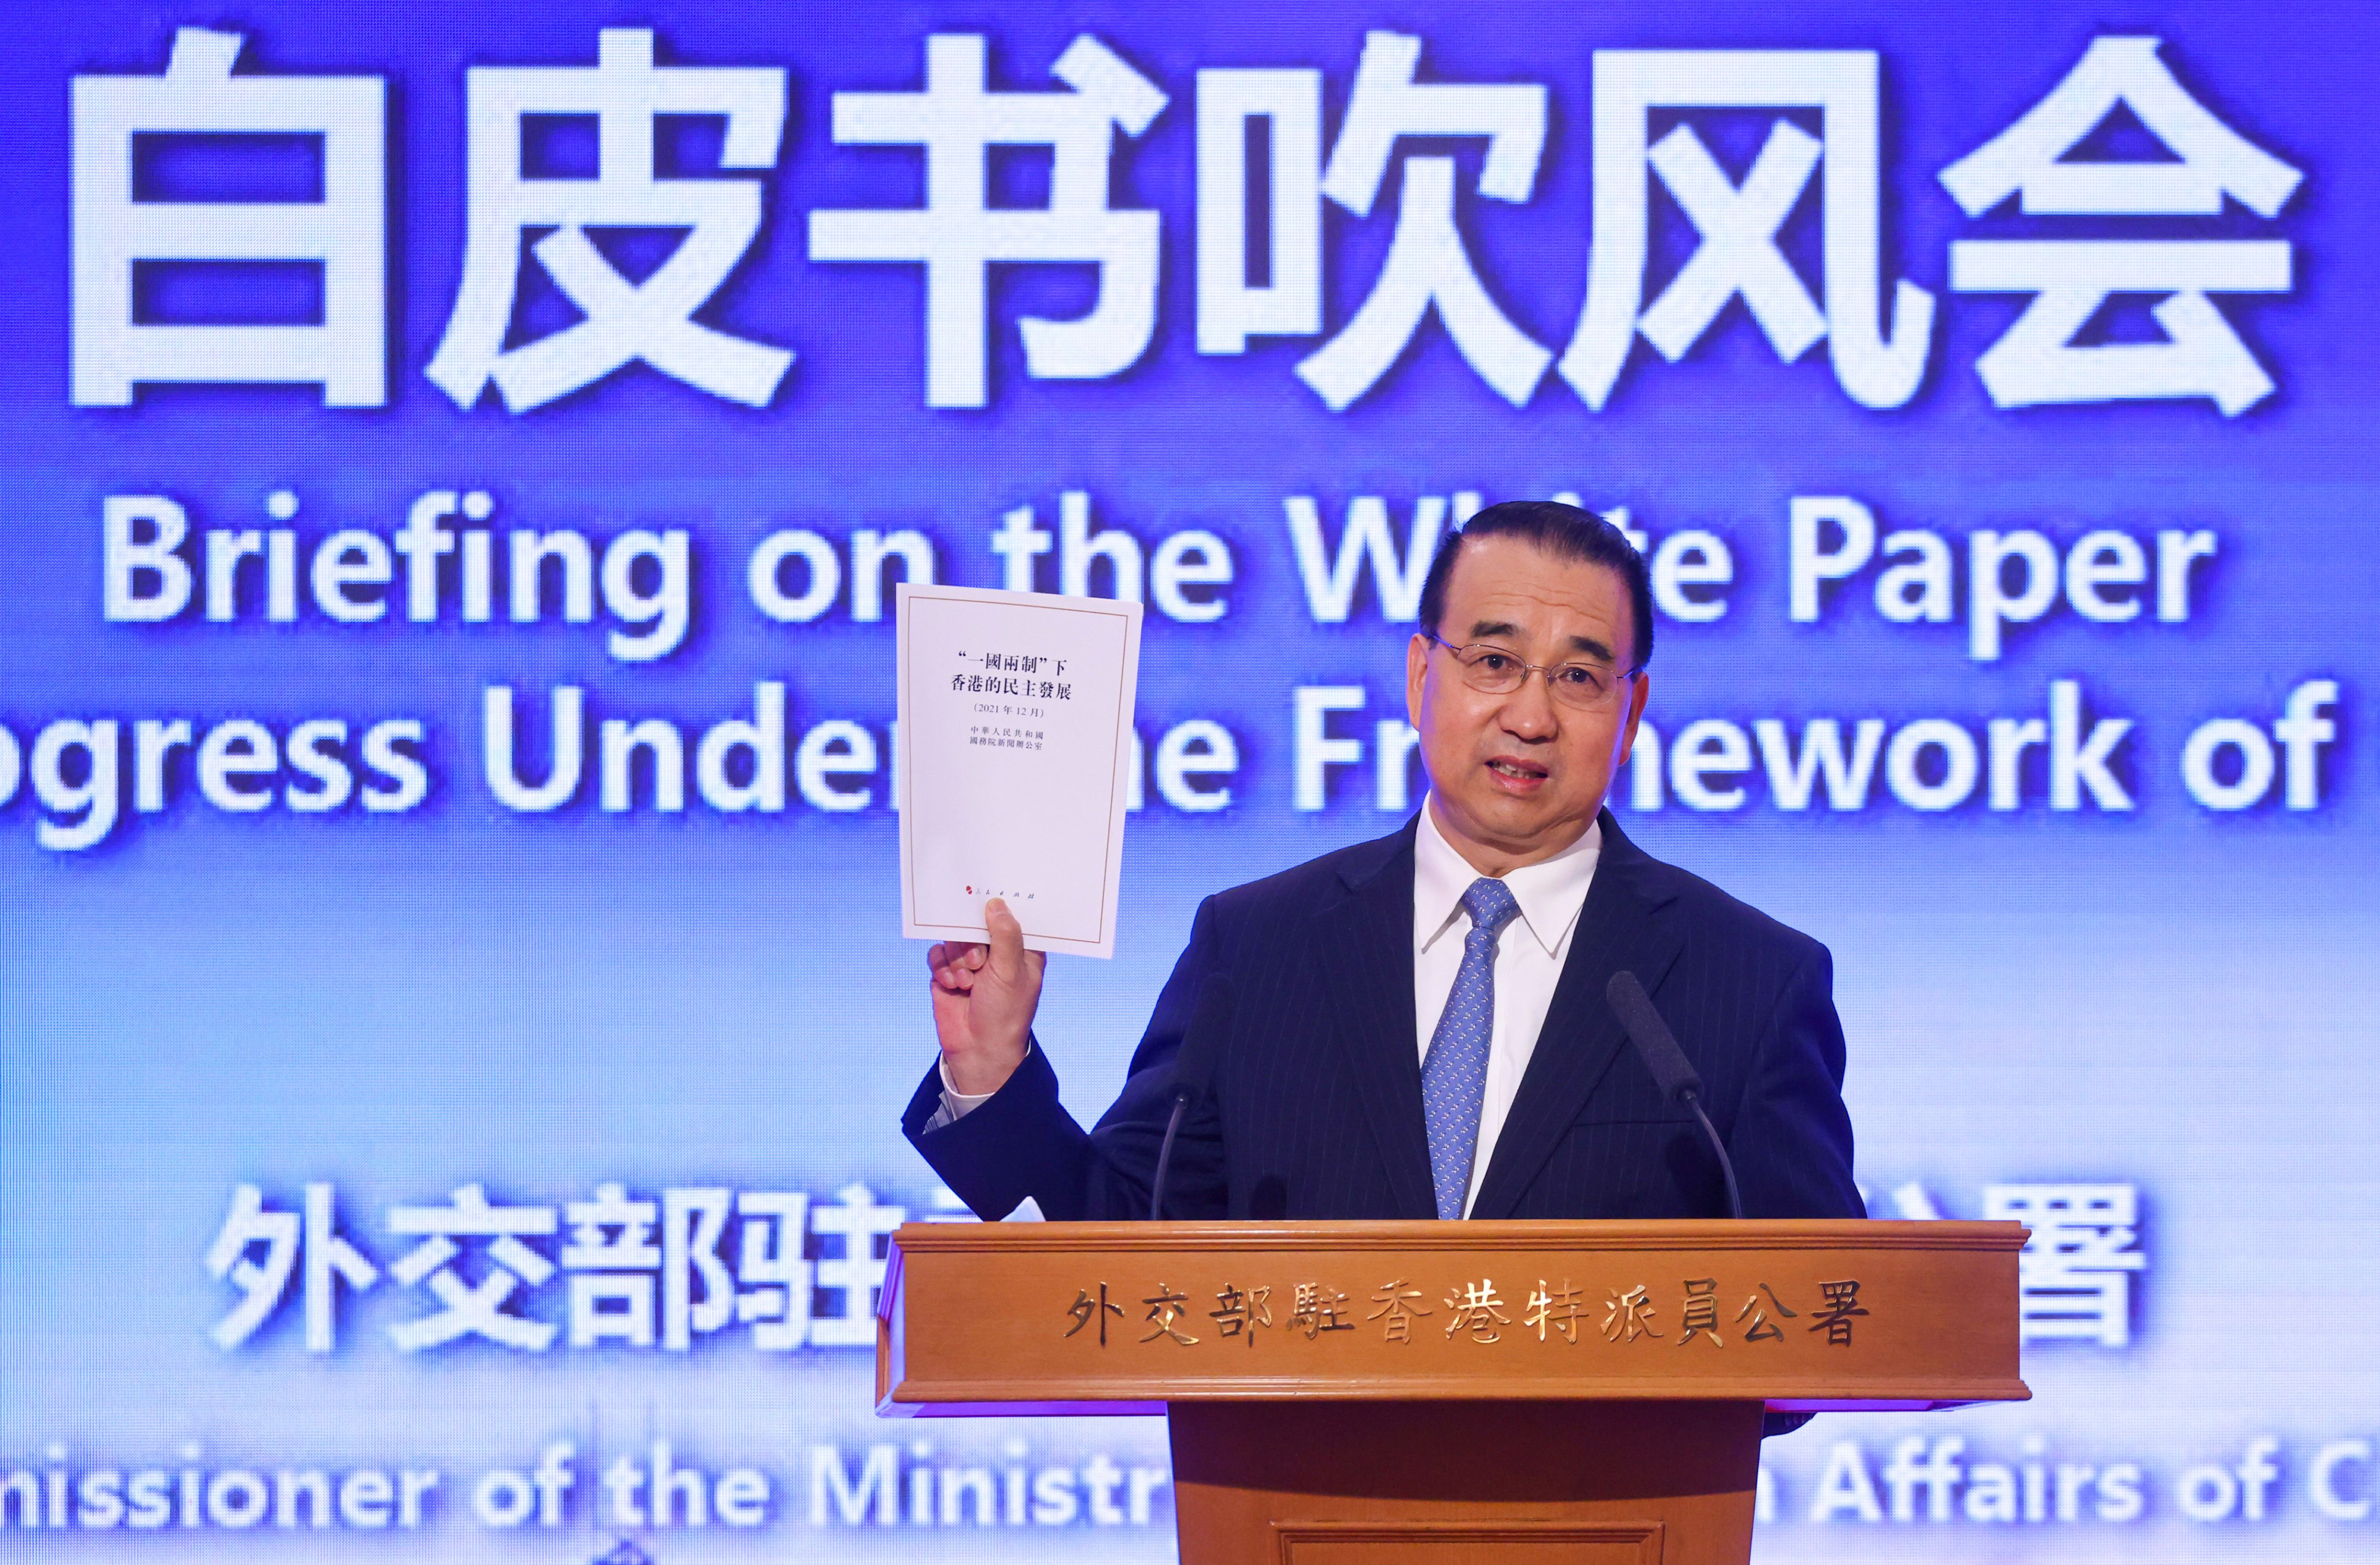 An official from the Chinese foreign ministry gives a briefing on the white paper in Hong Kong. Photo: Dickson Lee